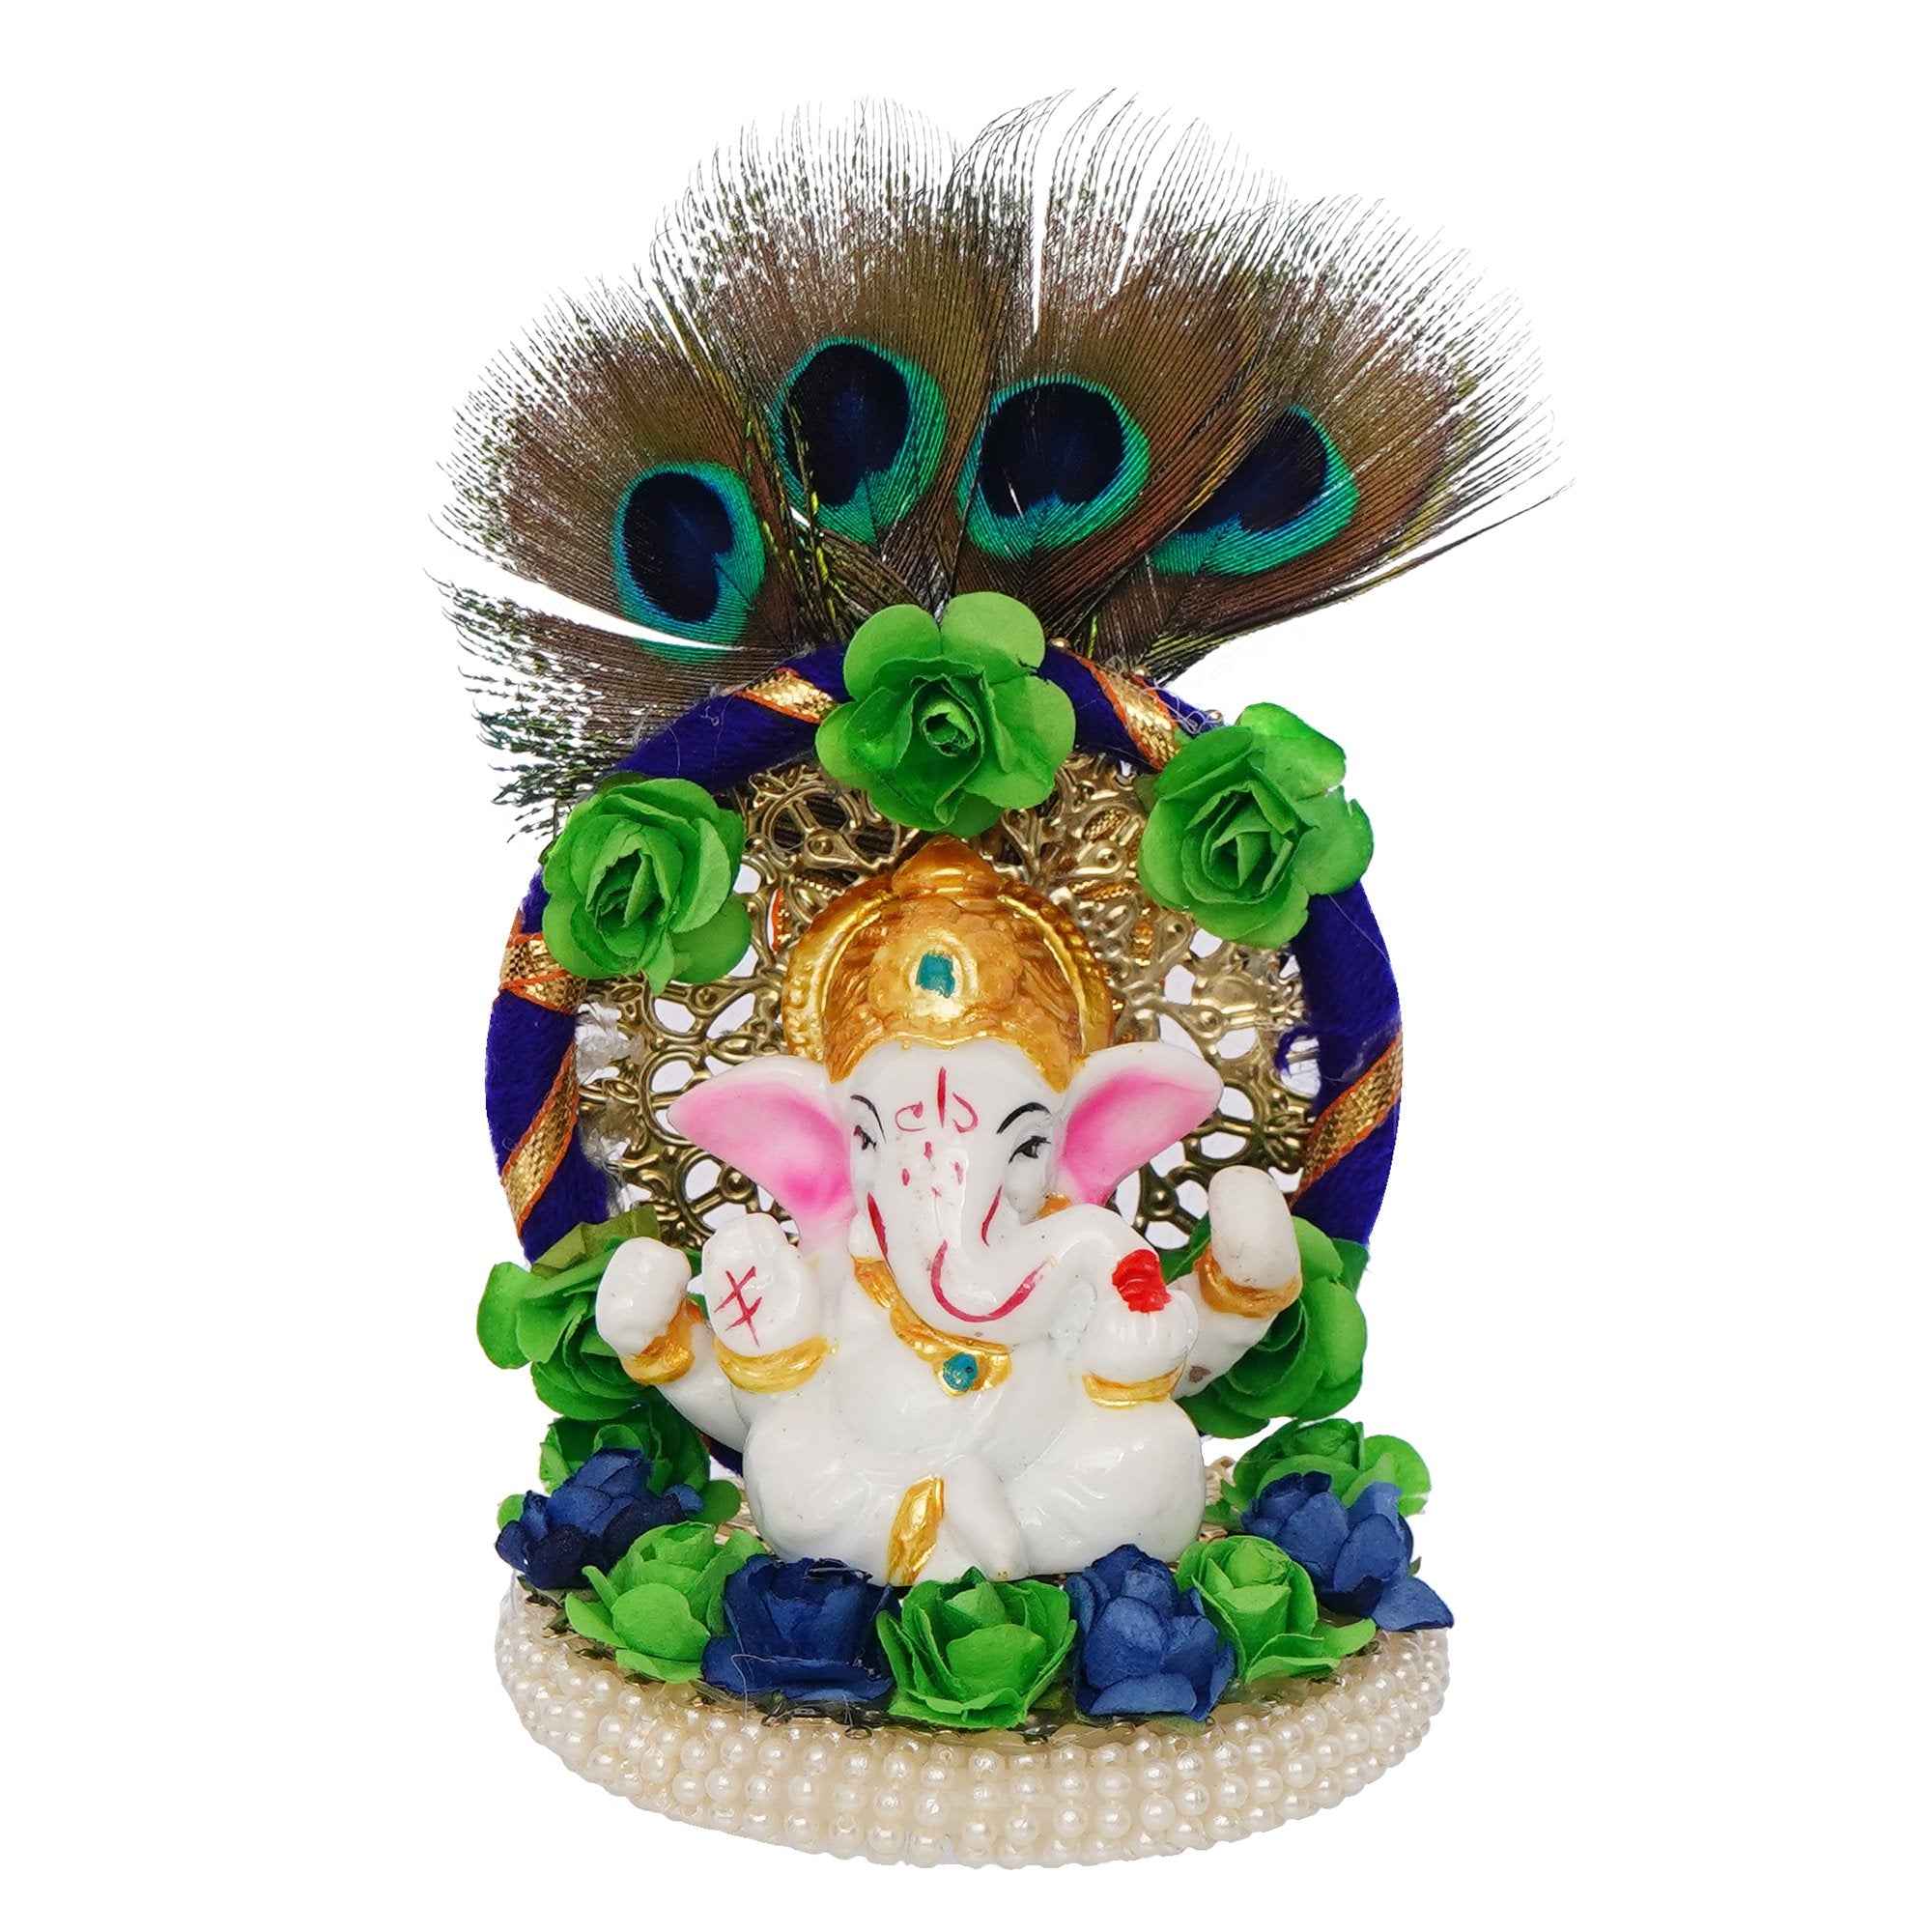 Polyresin Lord Ganesha Idol on Handcrafted Peacock Feather Floral Plate for Home and Car Dashboard 2